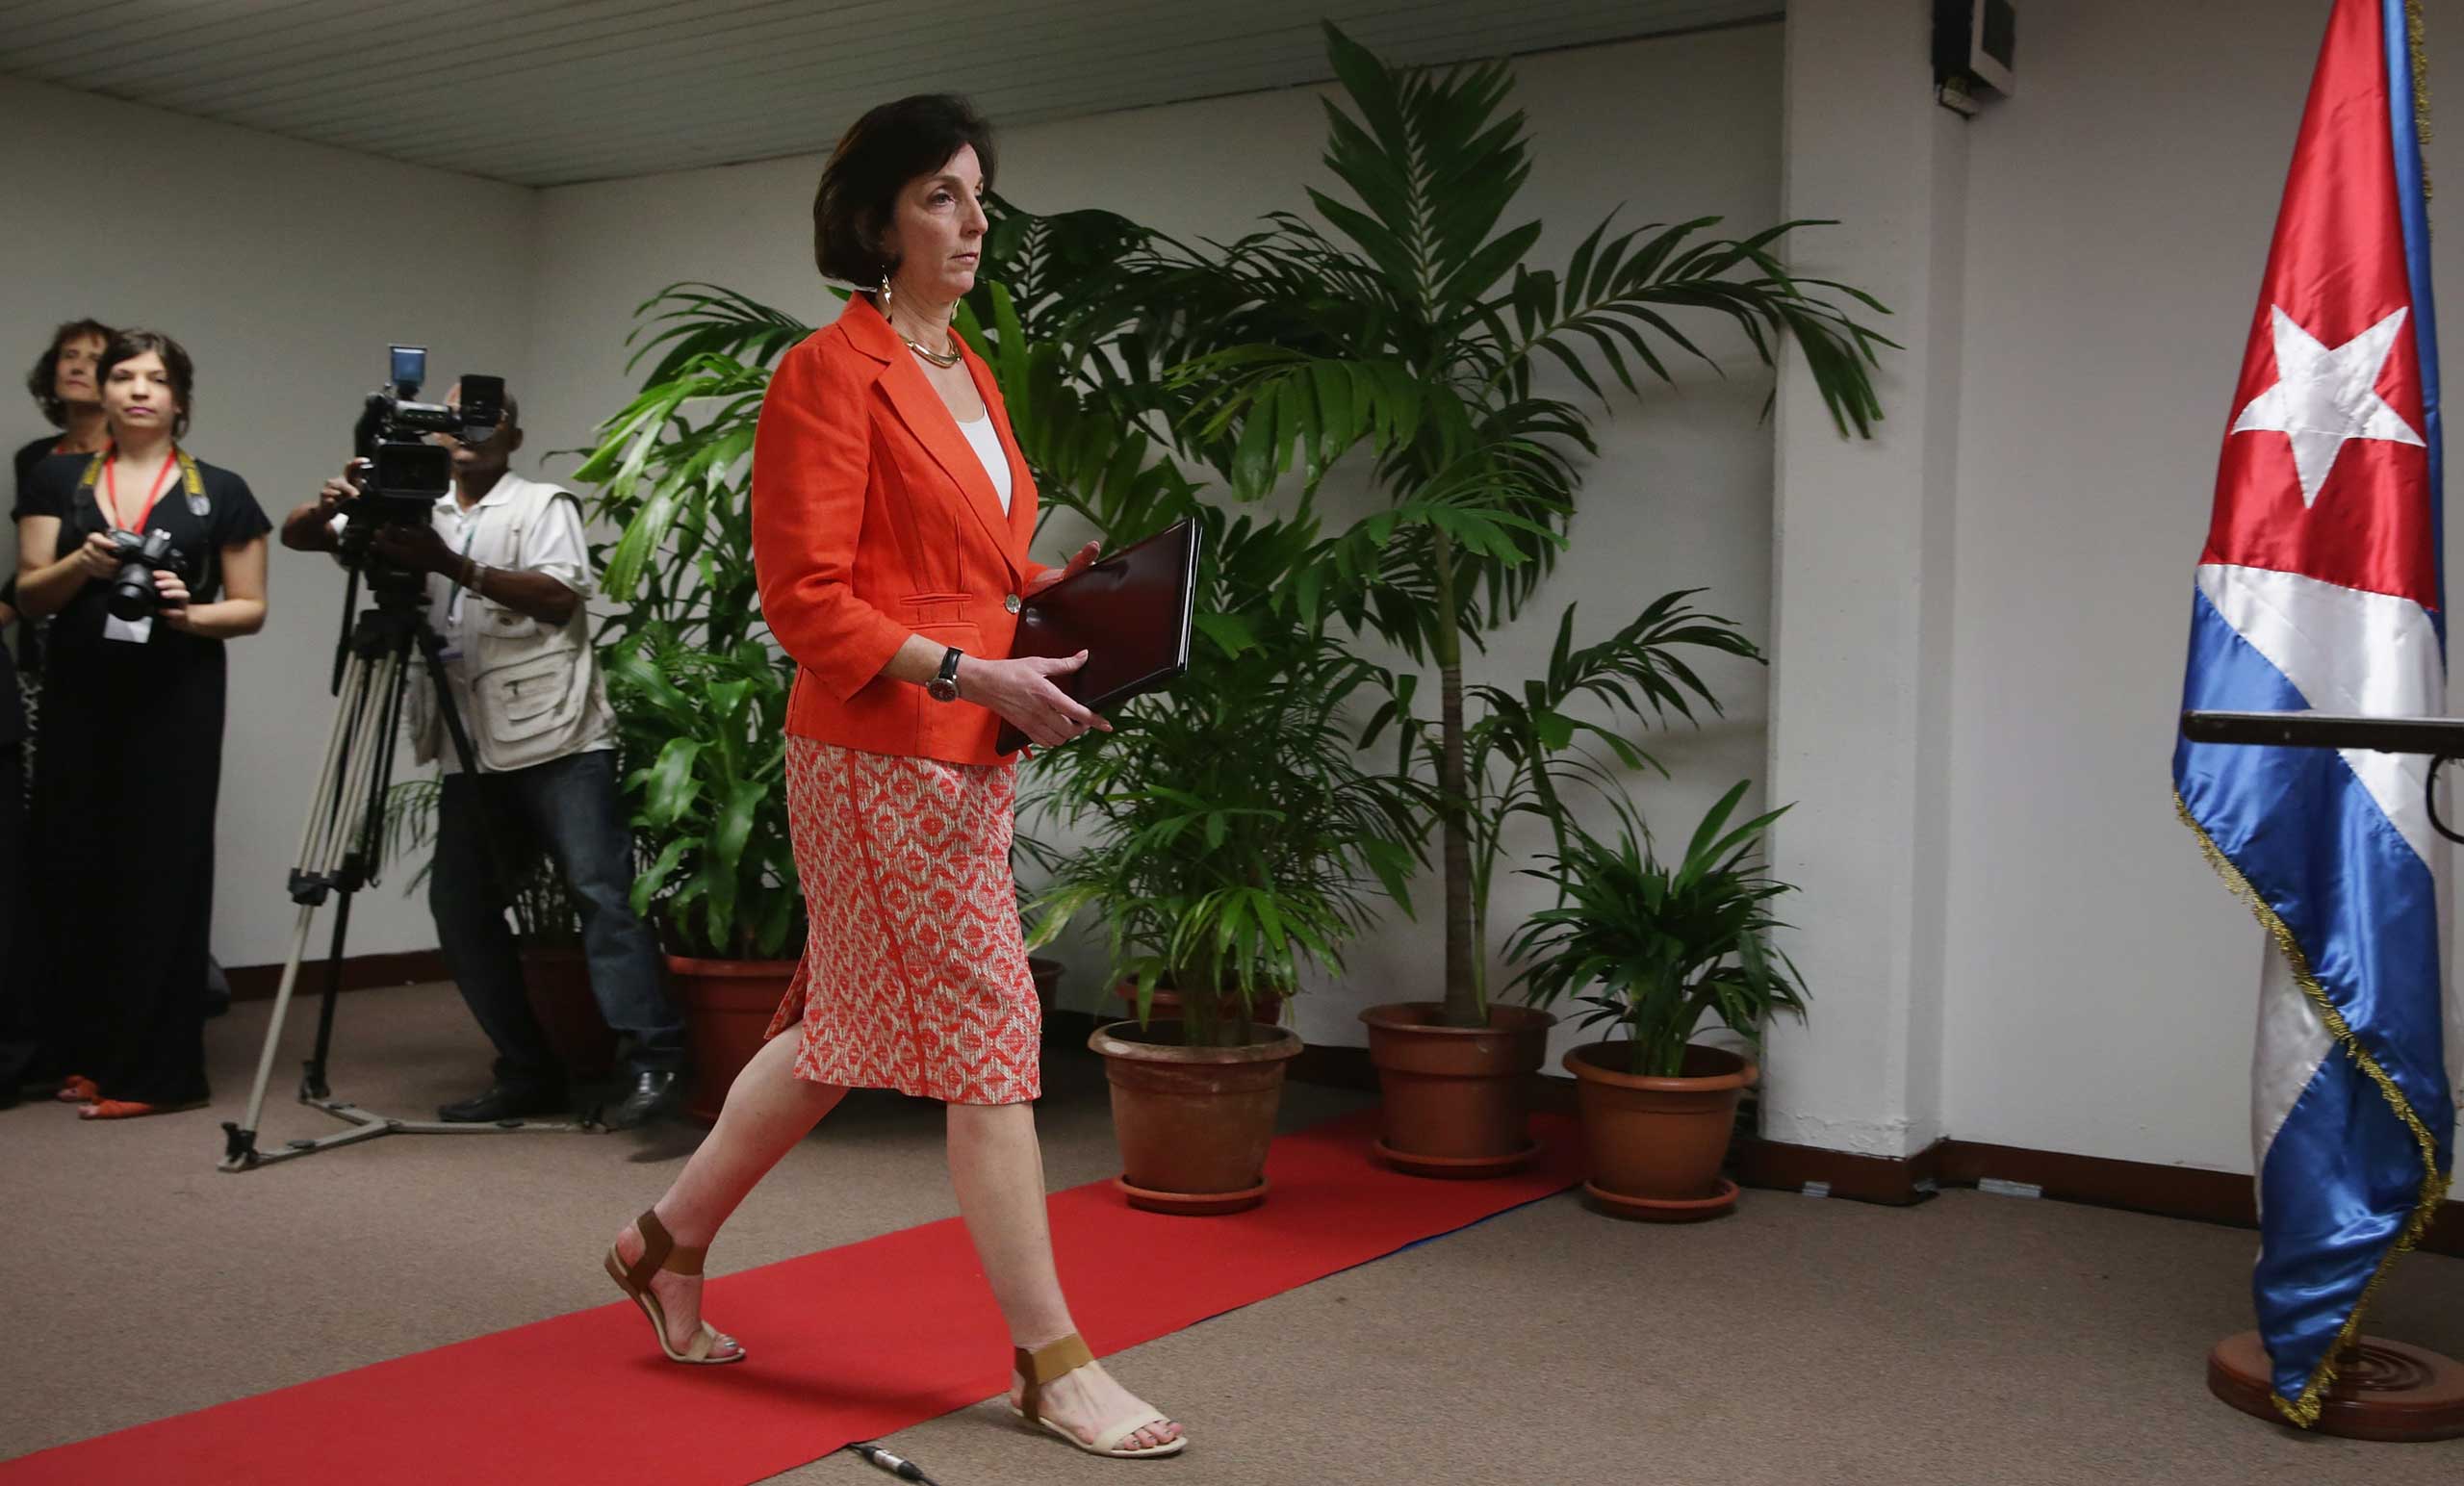 Roberta Jacobson, U.S Assistant Secretary of State for Western Hemisphere Affairs, arrives to speak to the media before taking questions during diplomatic talks with Cuba at the Palacio de las Convenciones de La Habana on Jan. 22, 2015 in Havana, Cuba. (Chip Somodevilla&mdash;Getty Images)